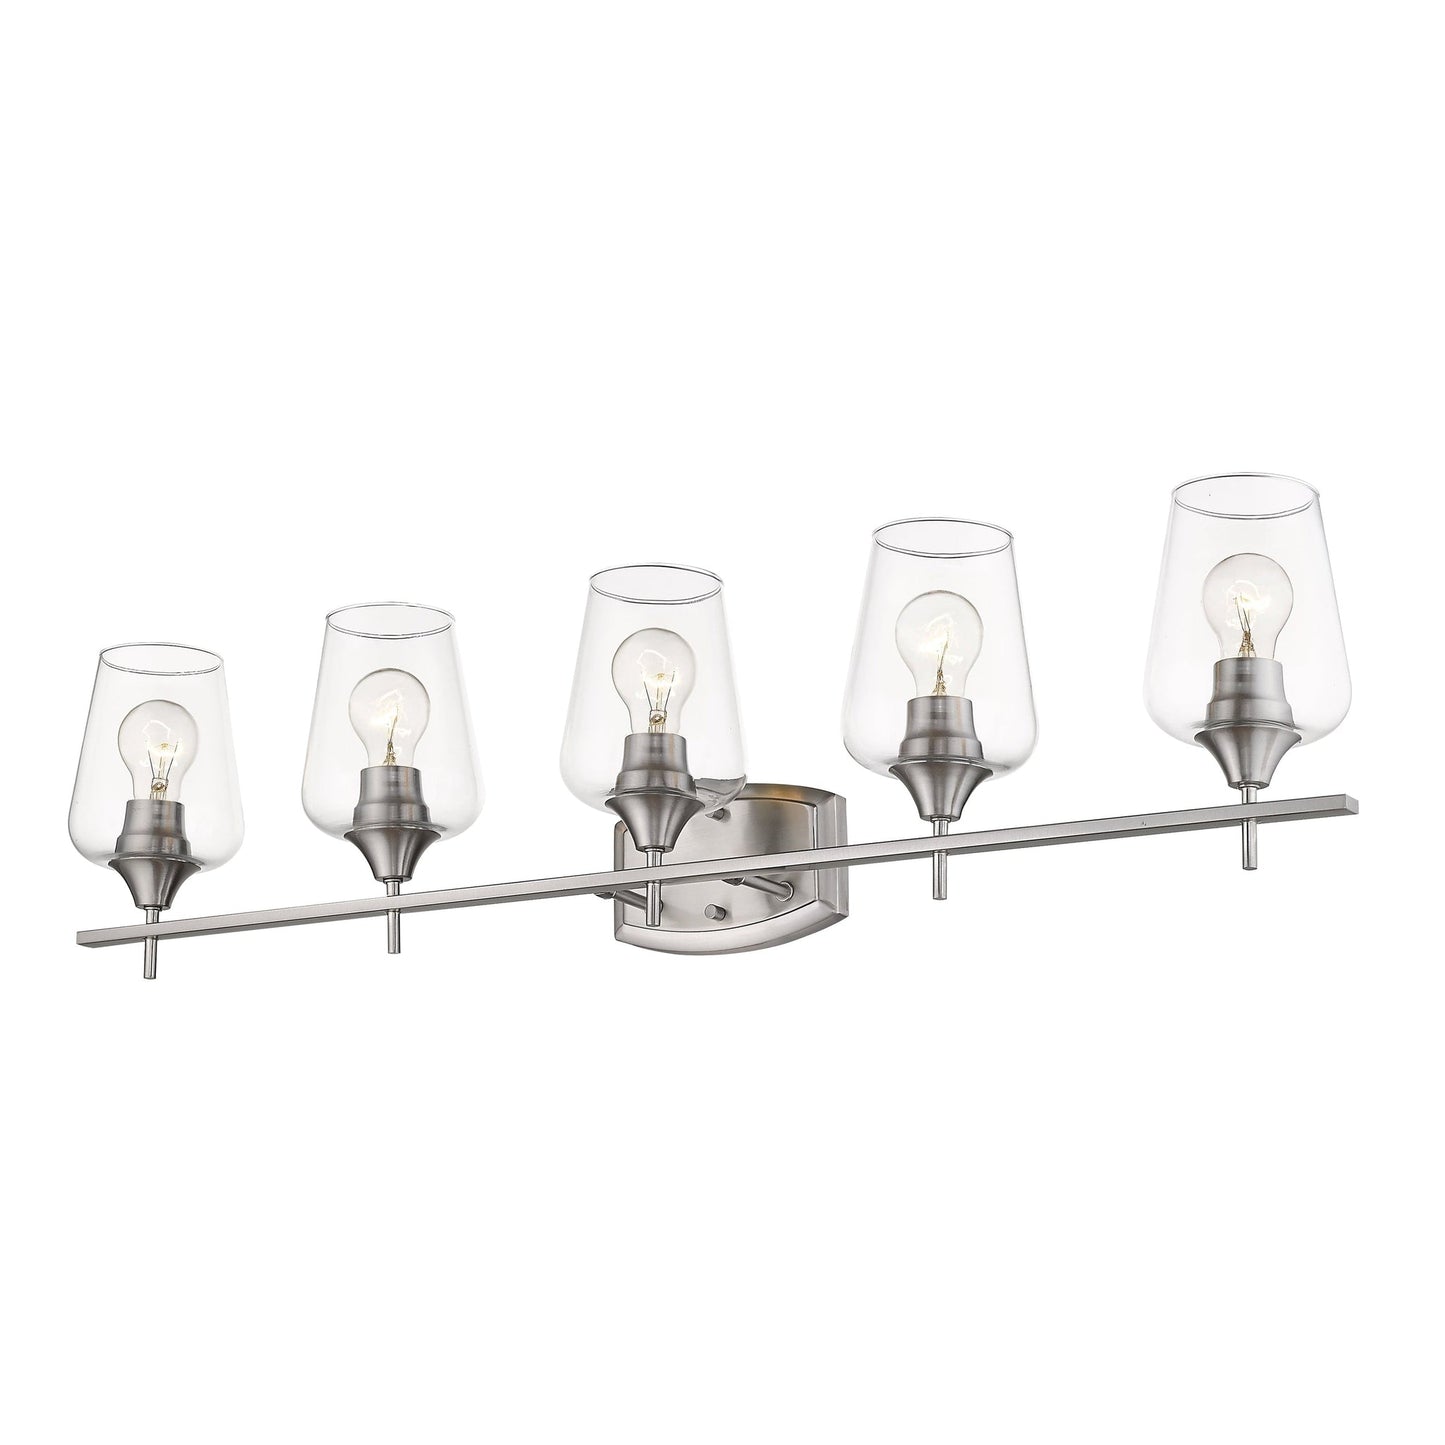 Z-Lite Joliet 38" 5-Light Brushed Nickel Vanity Light With Clear Glass Shade